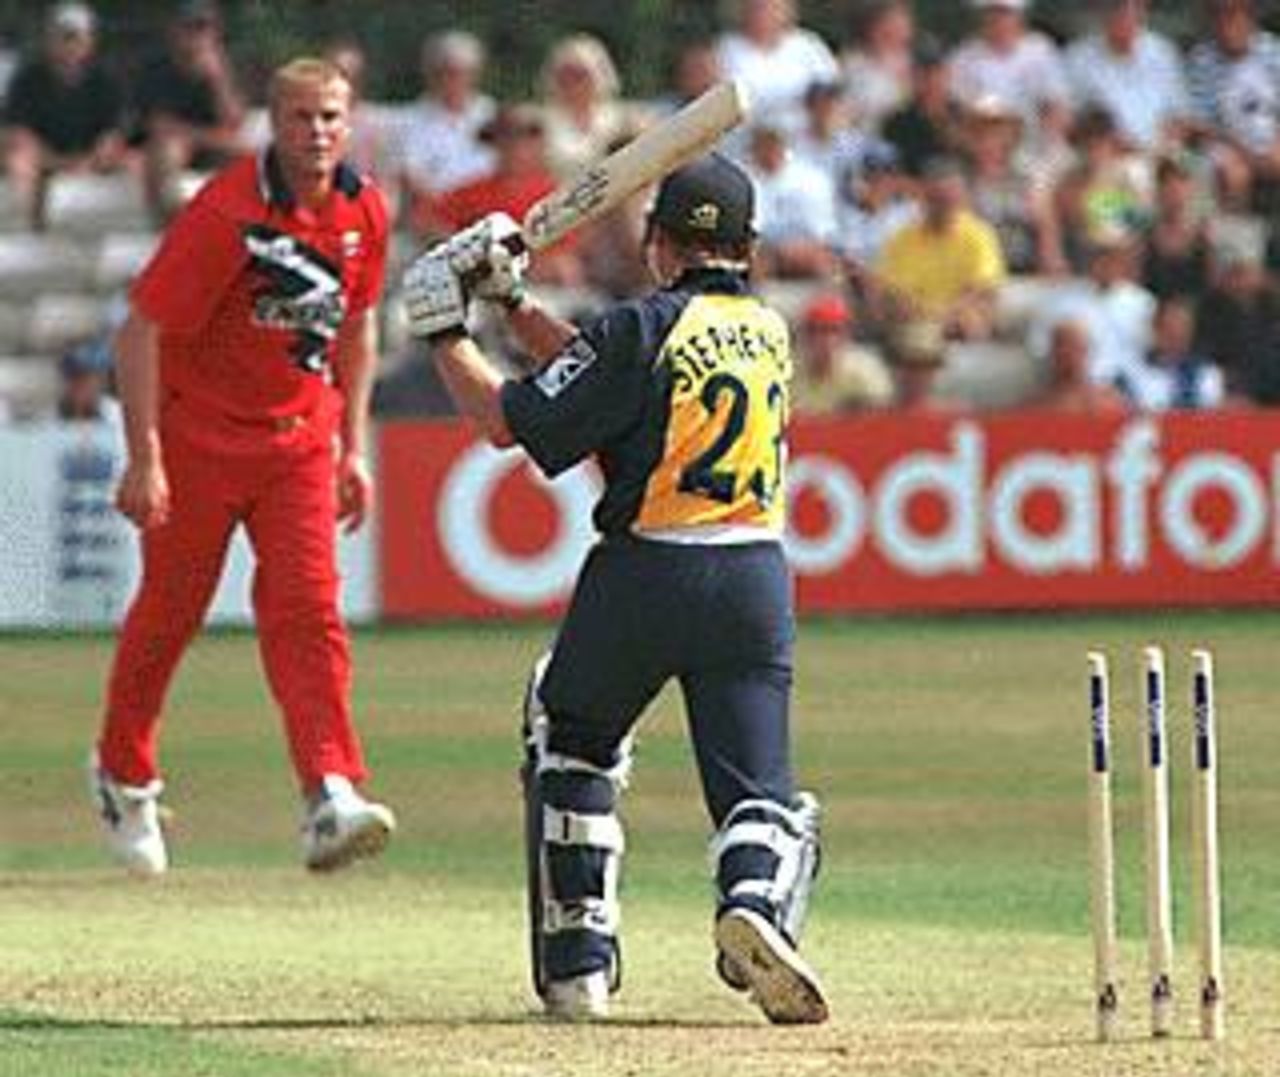 Stephenson bowled by Andrew Flintoff, Hampshire v Lancashire, National League 1st Division, 25 July 1999